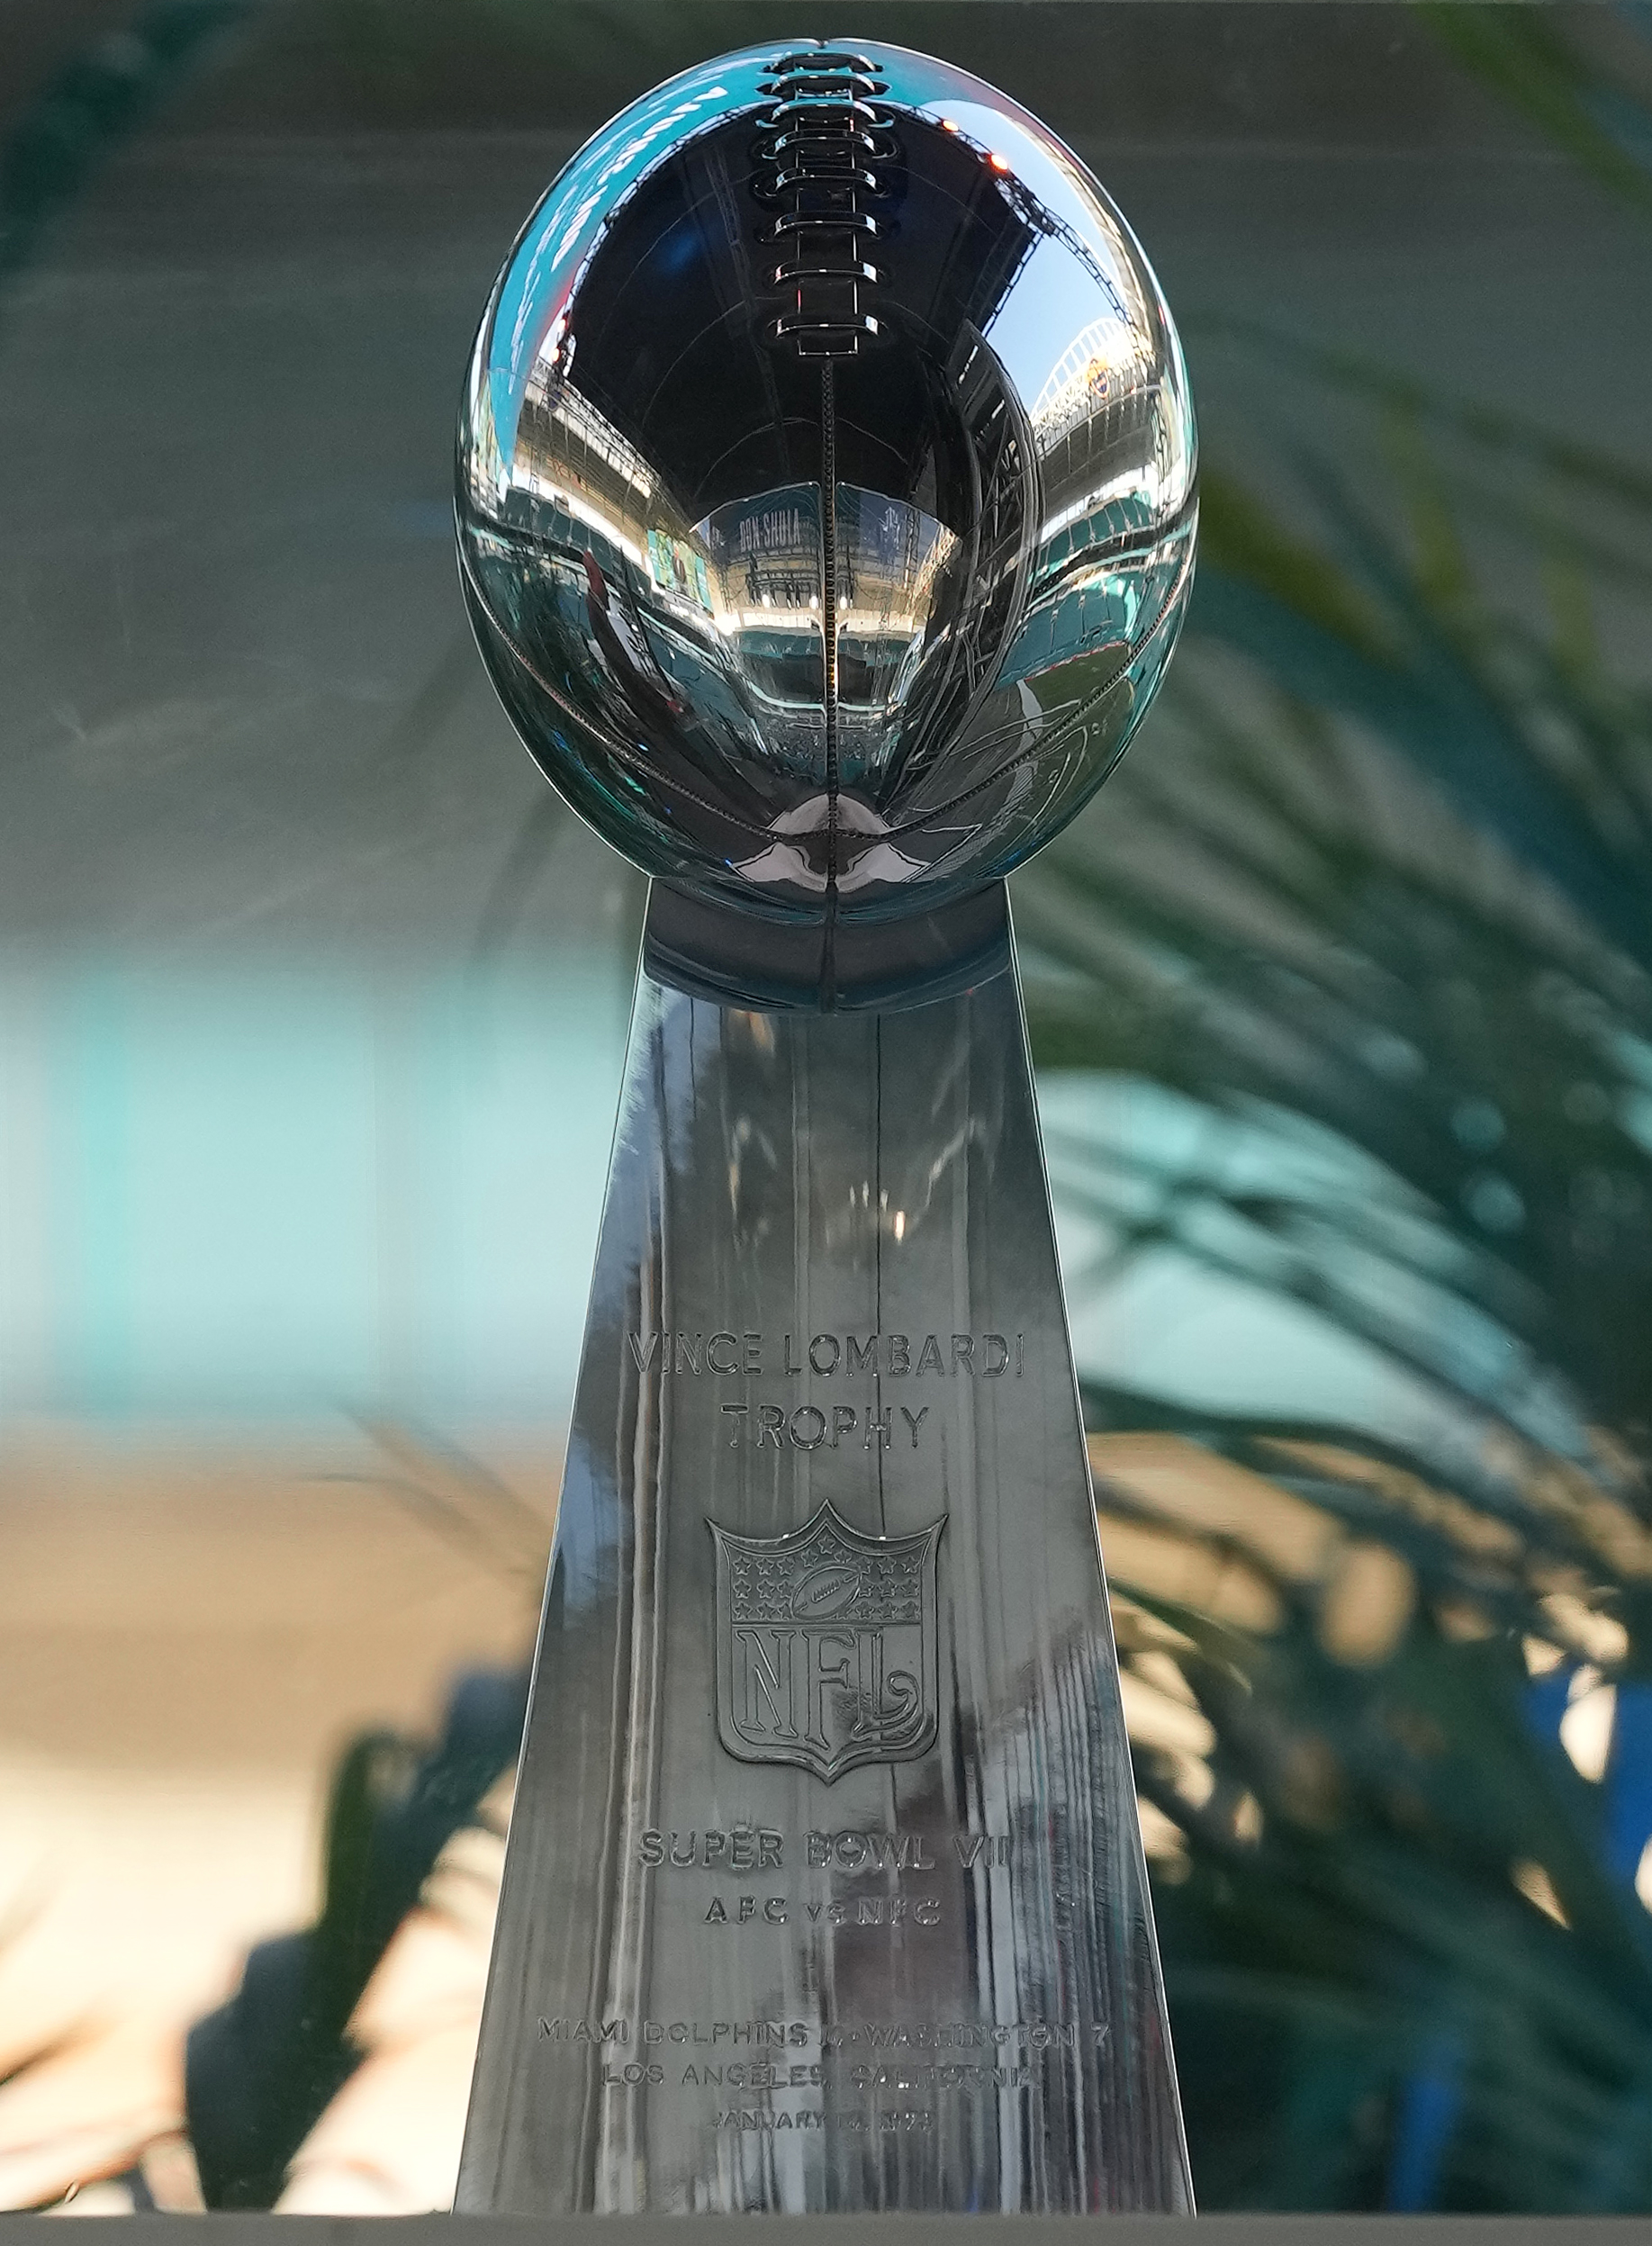 A general view of the Vince Lombardi trophy from Super Bowl VII won by the 1972 Dolphins during their 17-0 perfect season on display during the Don Shula Celebration of Life at Hard Rock Stadium.